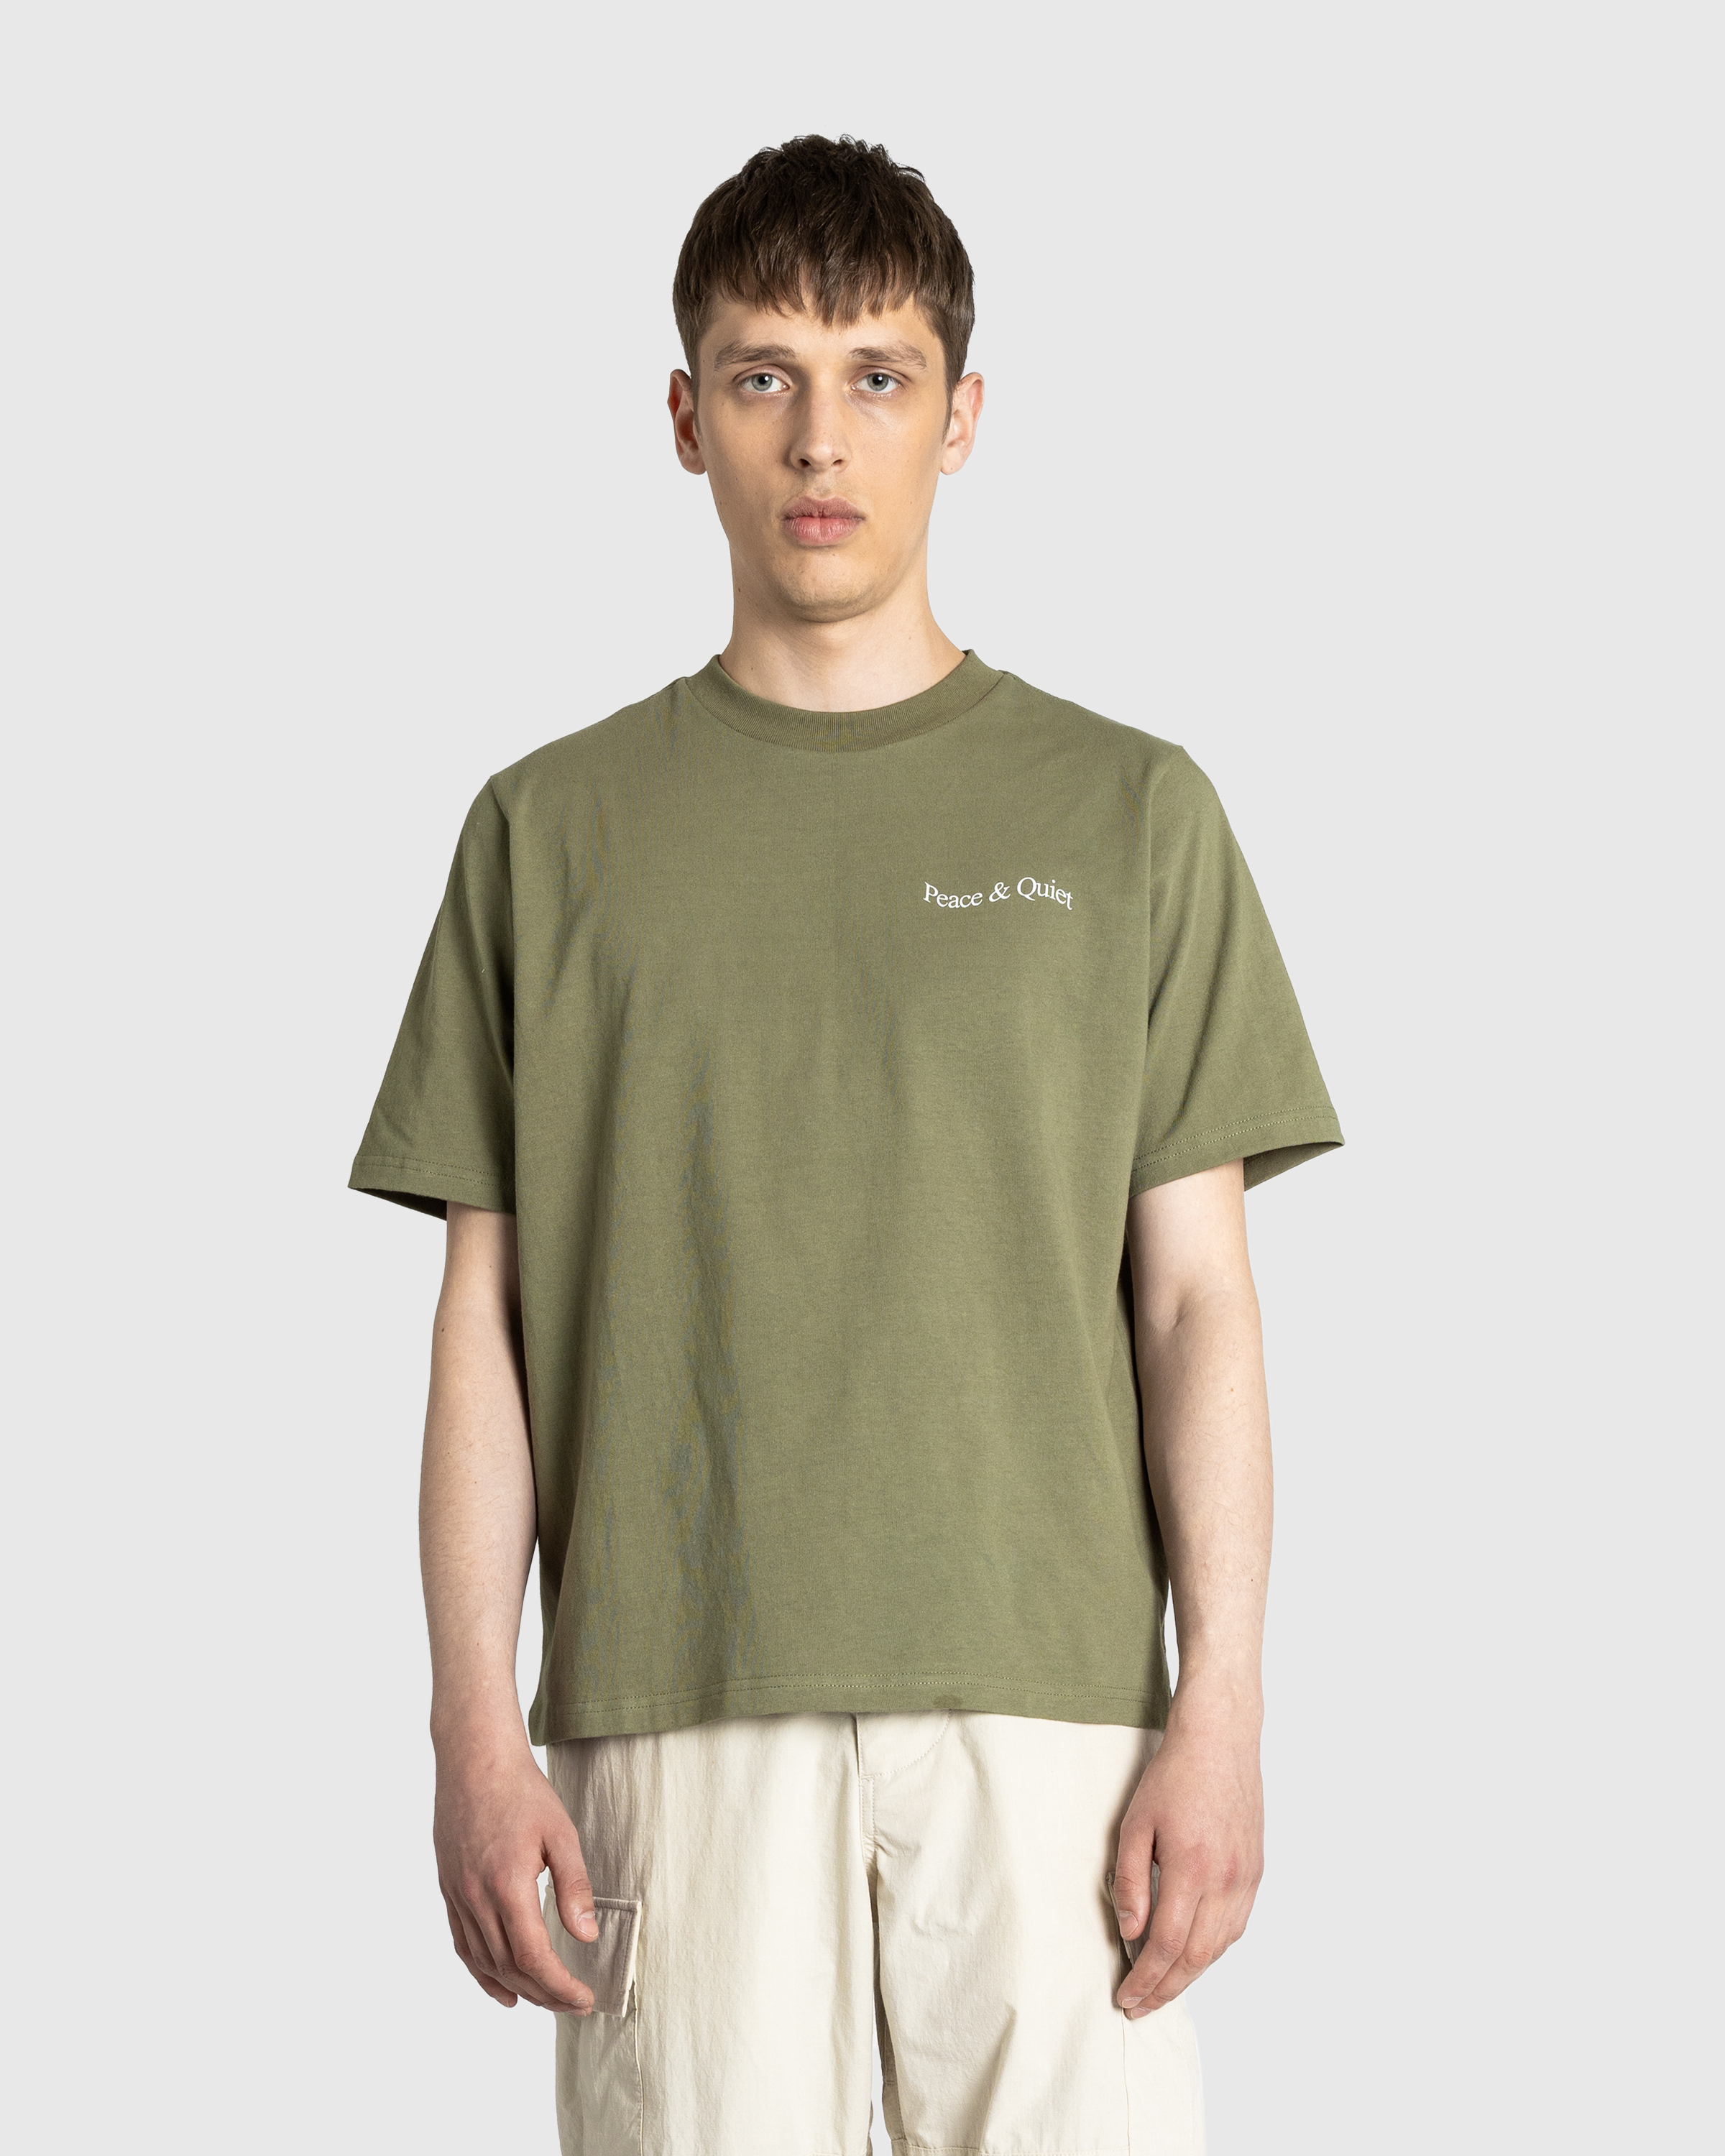 Museum of Peace & Quiet – Wordmark T-Shirt Olive - T-Shirts - Green - Image 2